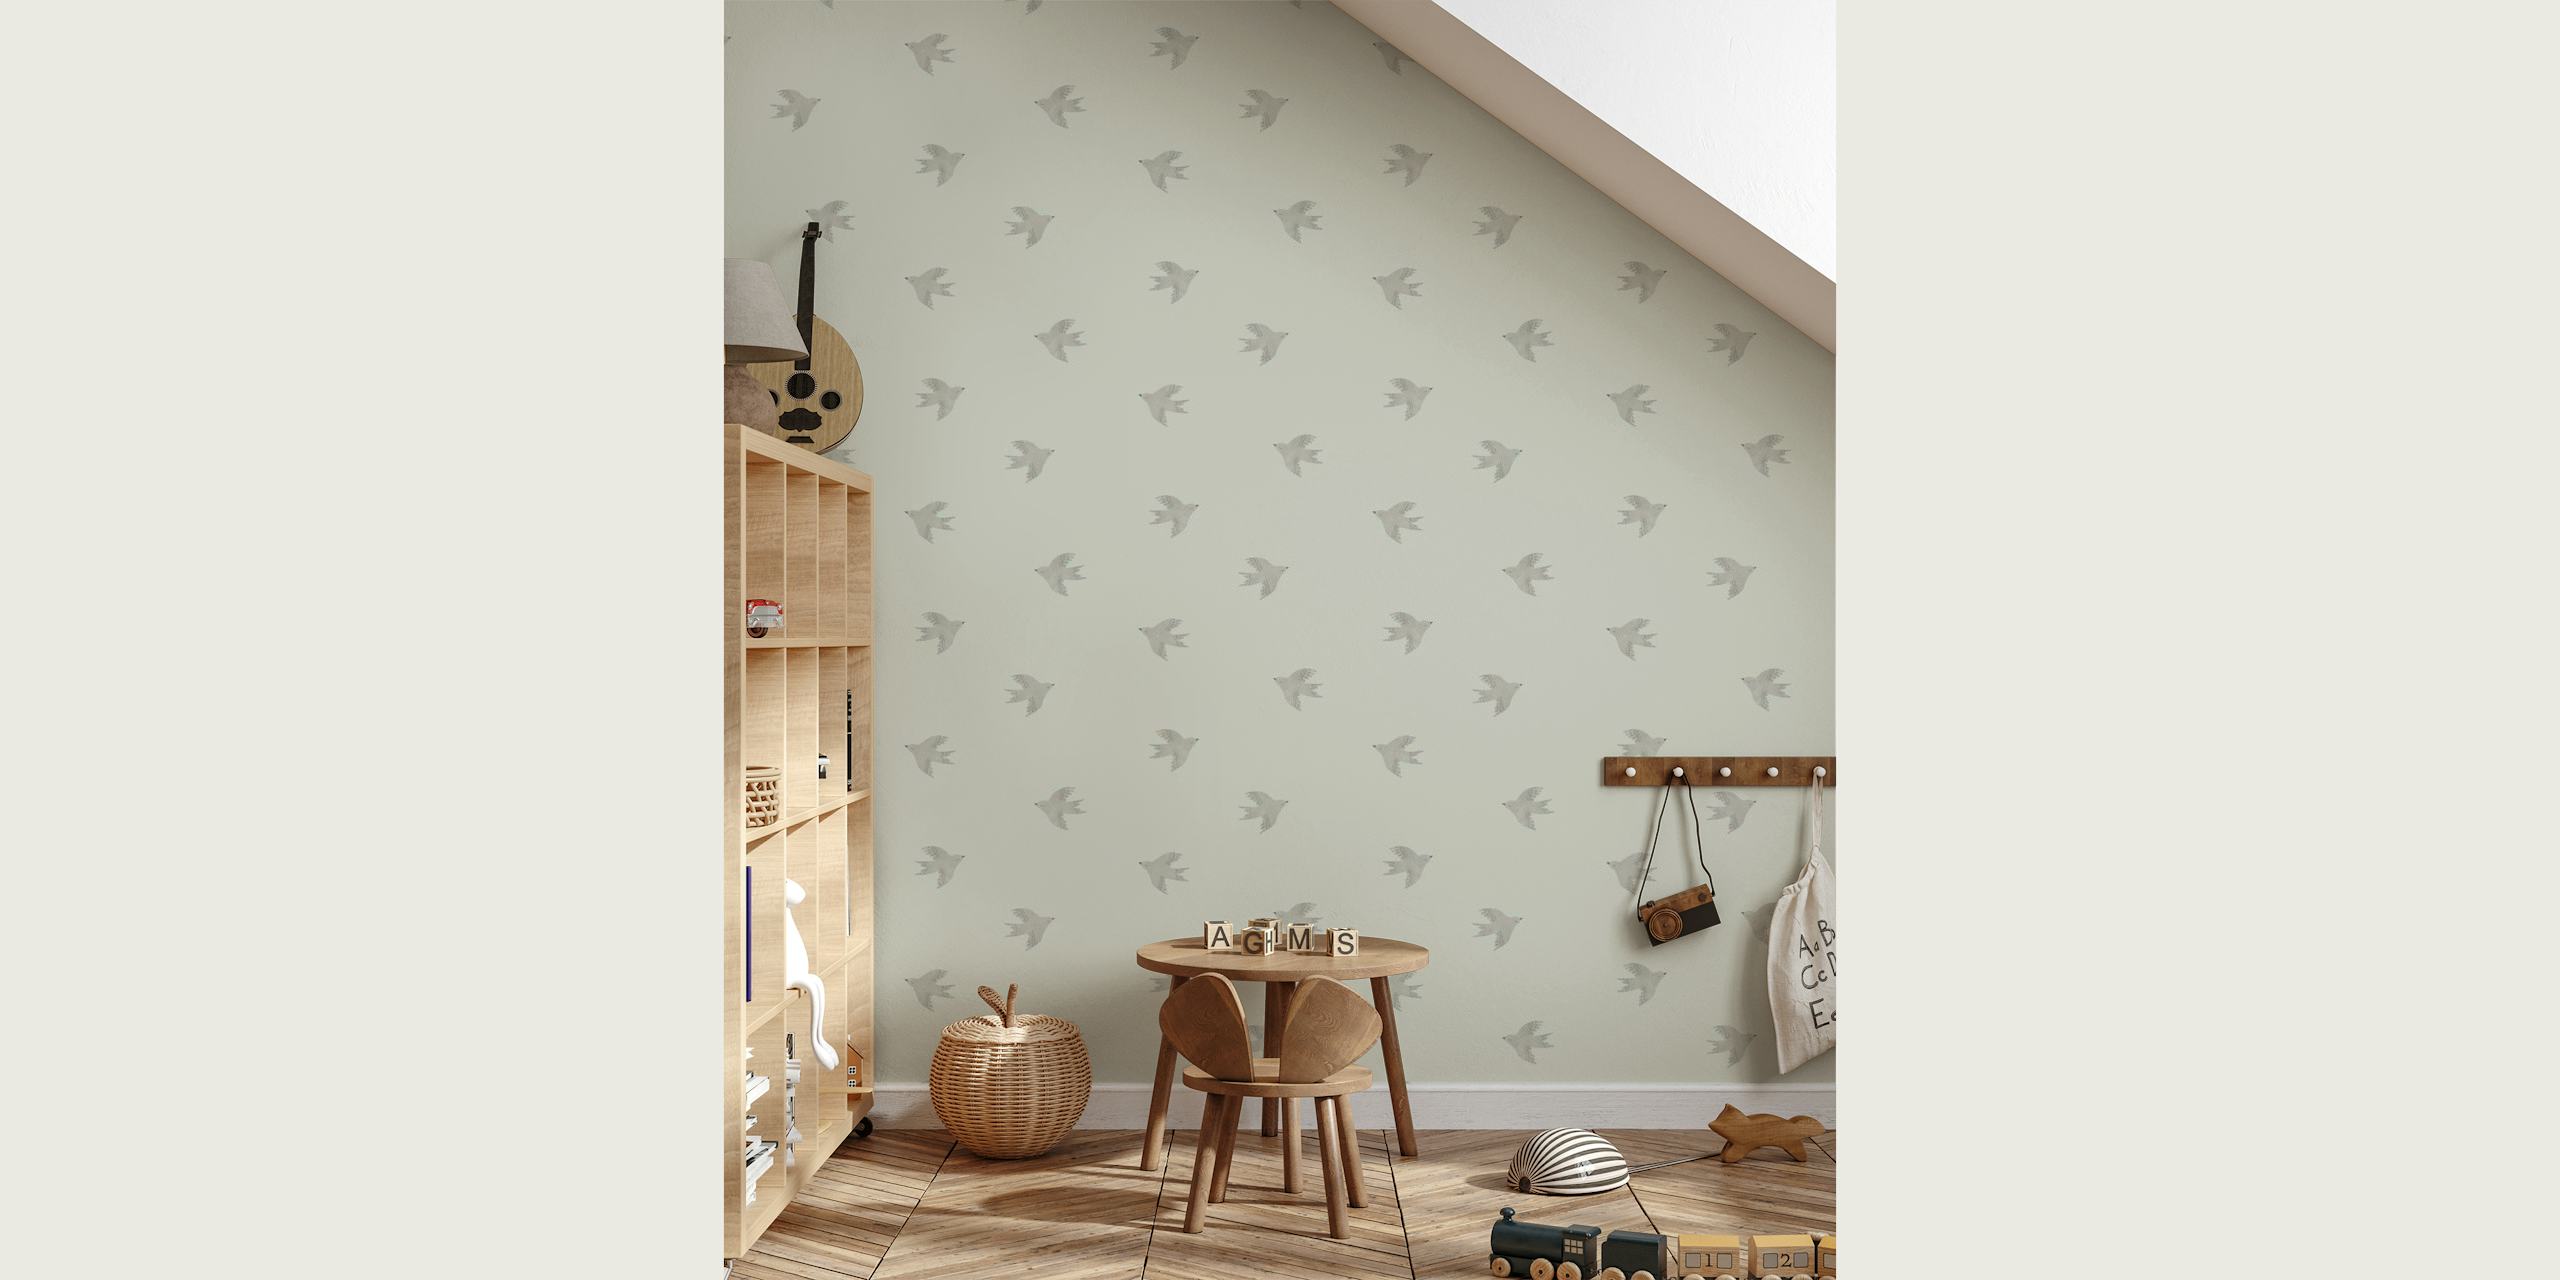 Dreamy Birds Cloudy Gray Wall Mural with birds in flight pattern over a gray background